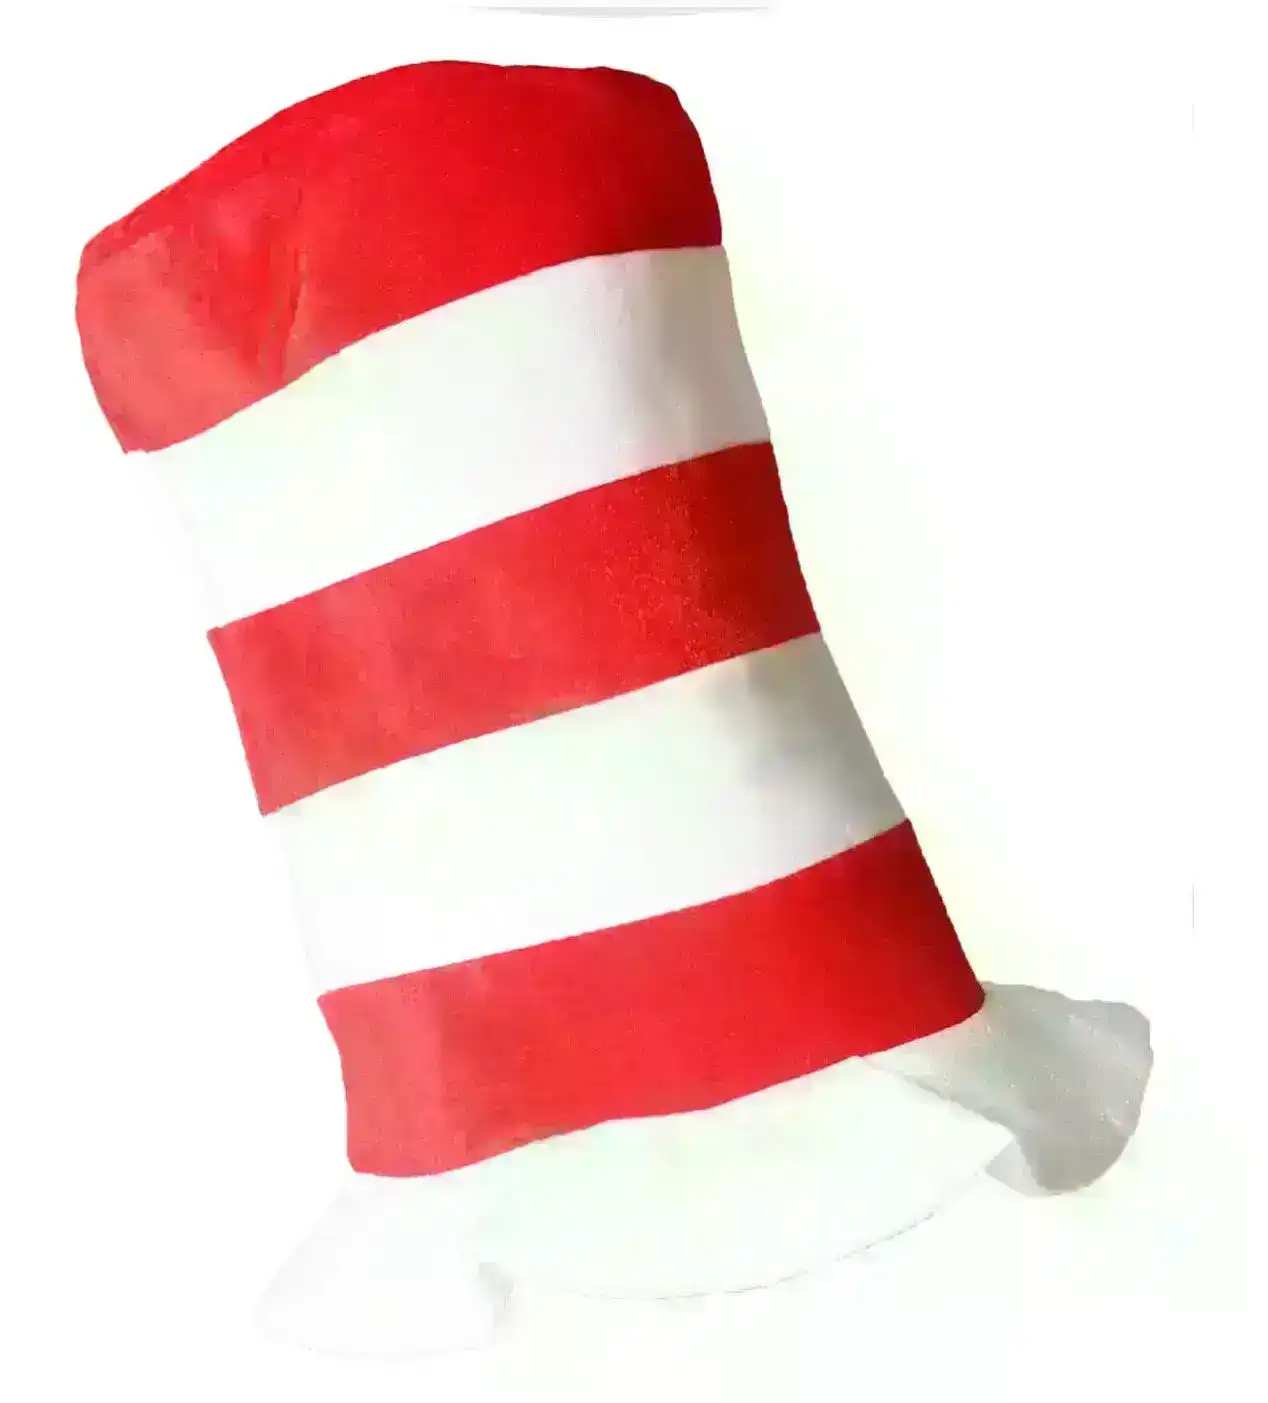 Dr Seuss Cat In The Hat Child Size Costume Hat Party Fancy Dress Birthday